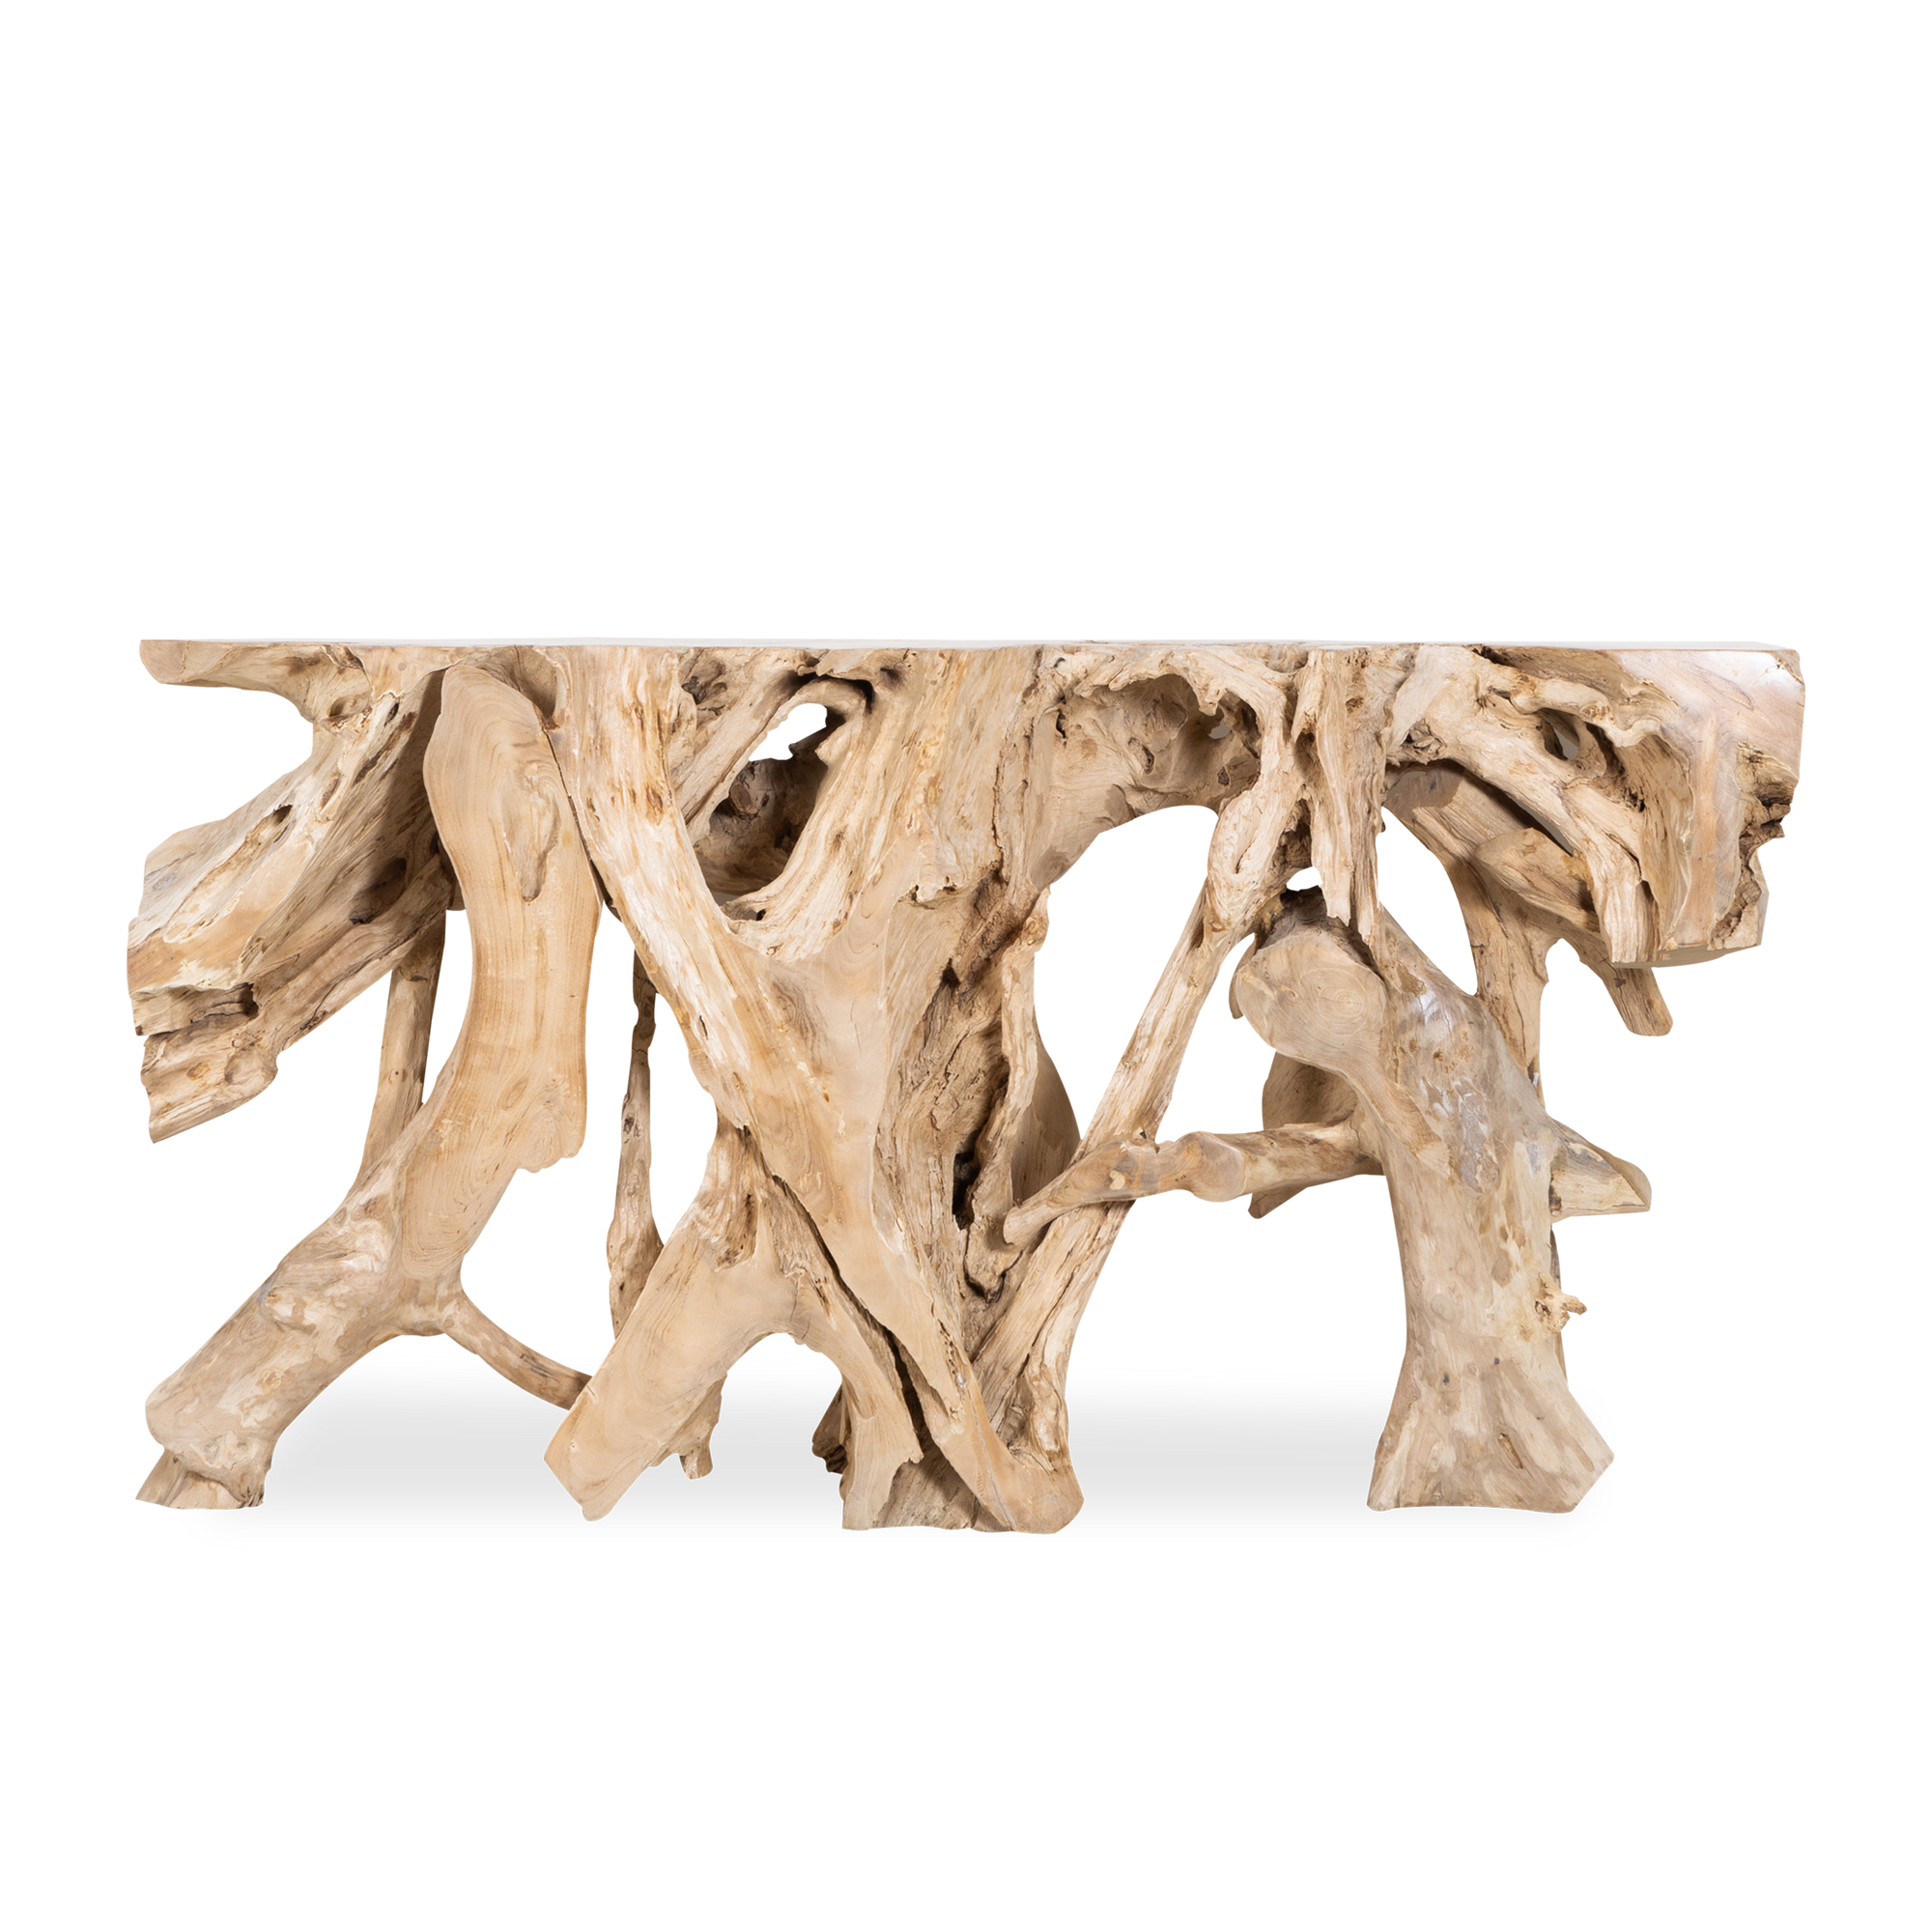 Crafted from reclaimed teak root, introduce an organic shape to any space with the Teak Root Coffee Table.